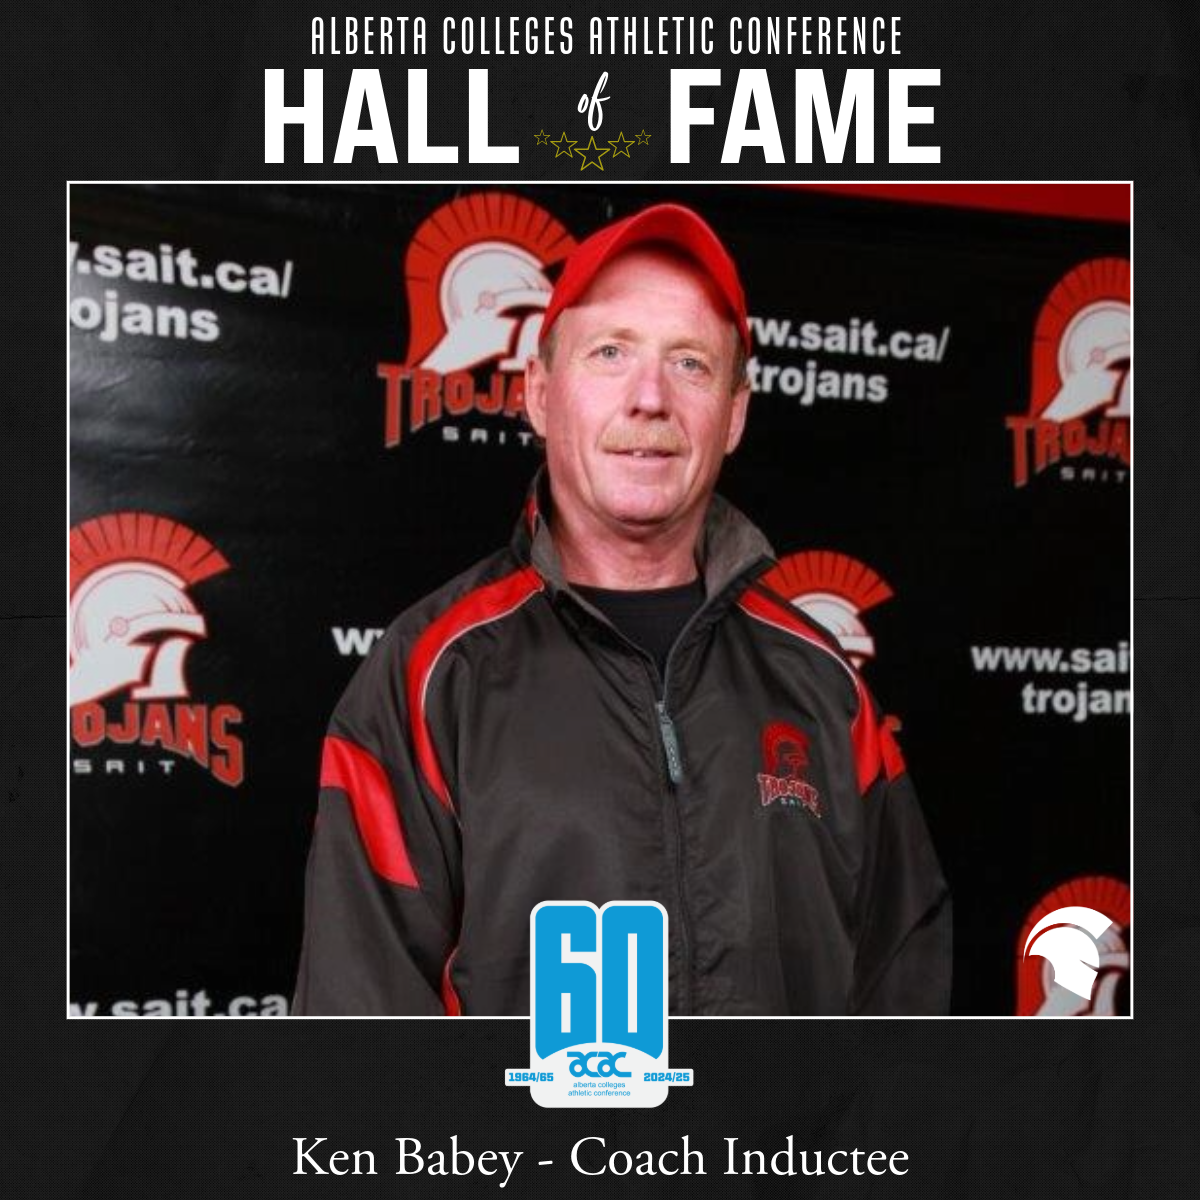 ACAC Hall of Fame Coach Inductee: Ken Babey